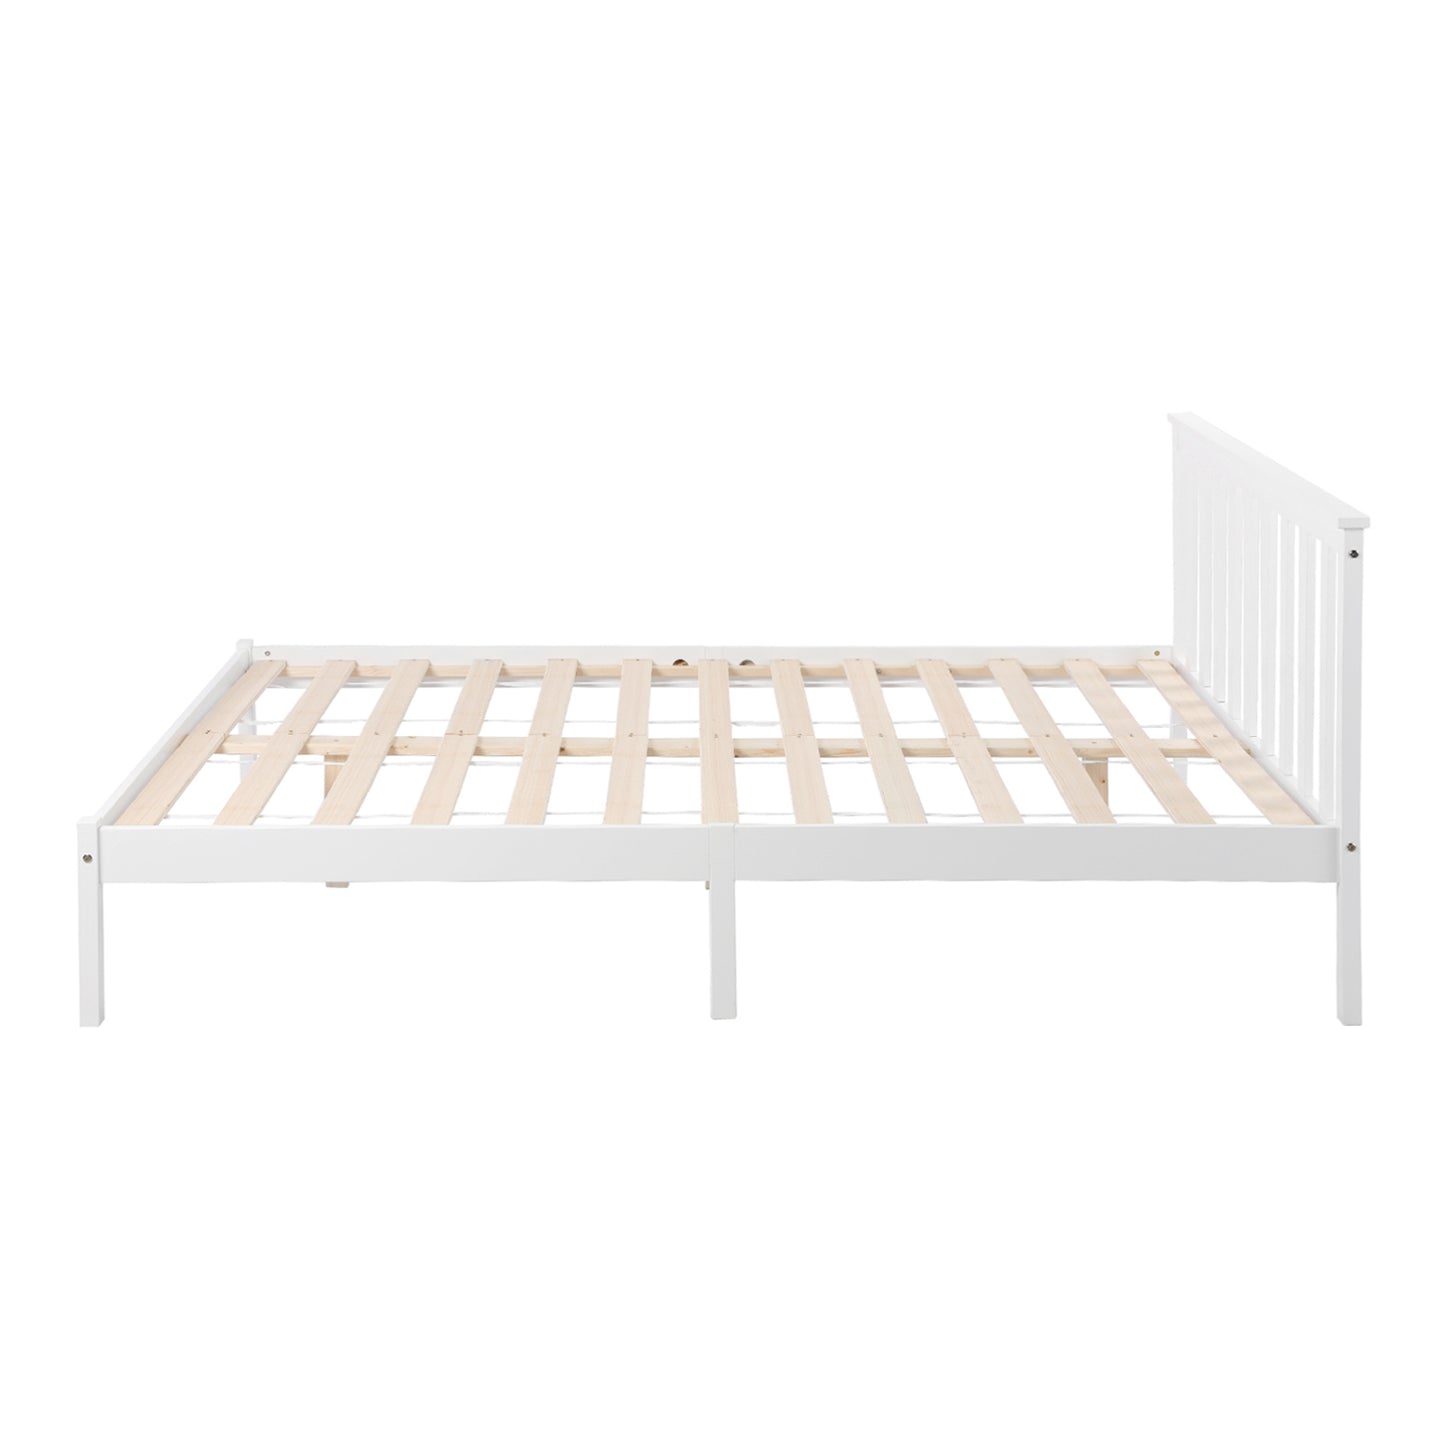 COLE Double Pine Wooden Bed 147.2*196cm - White